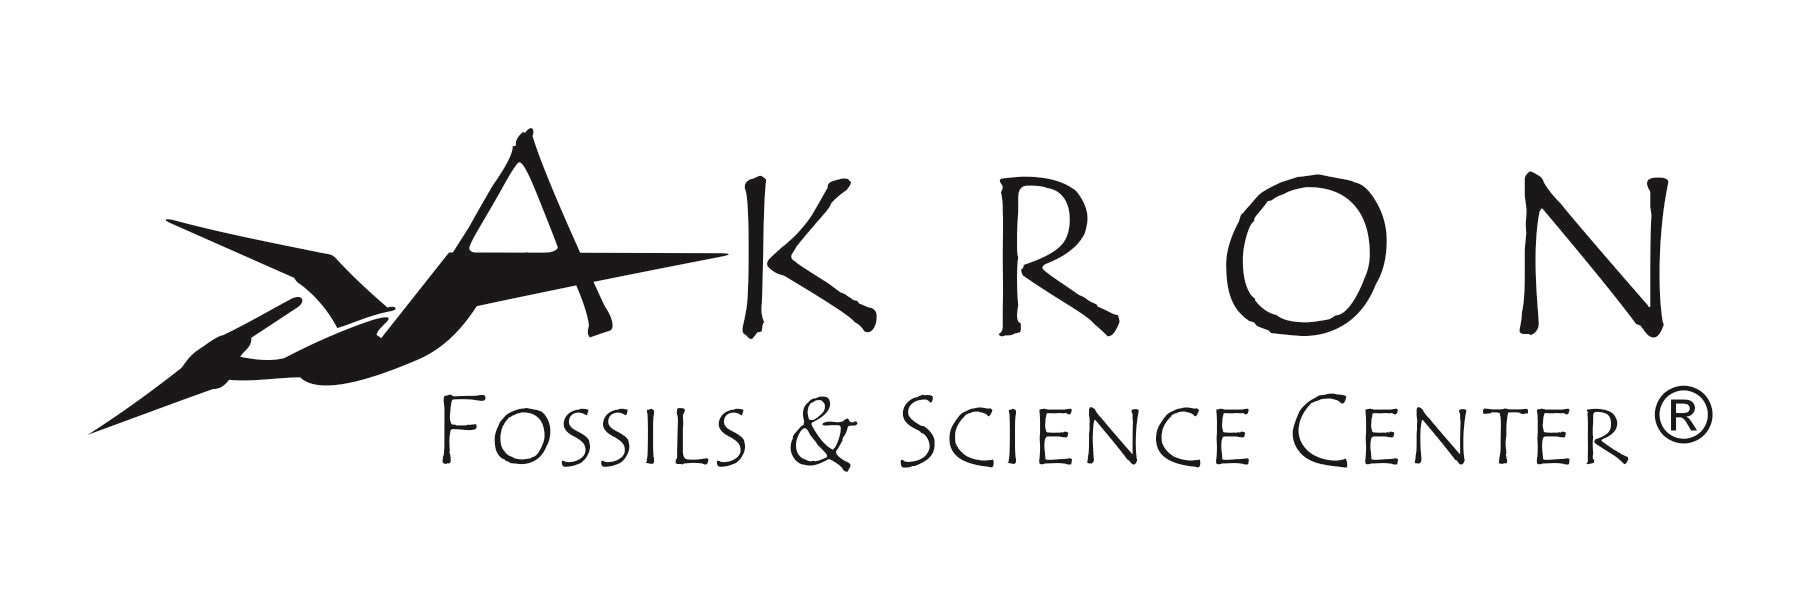 Akron Fossils & Science Center logo